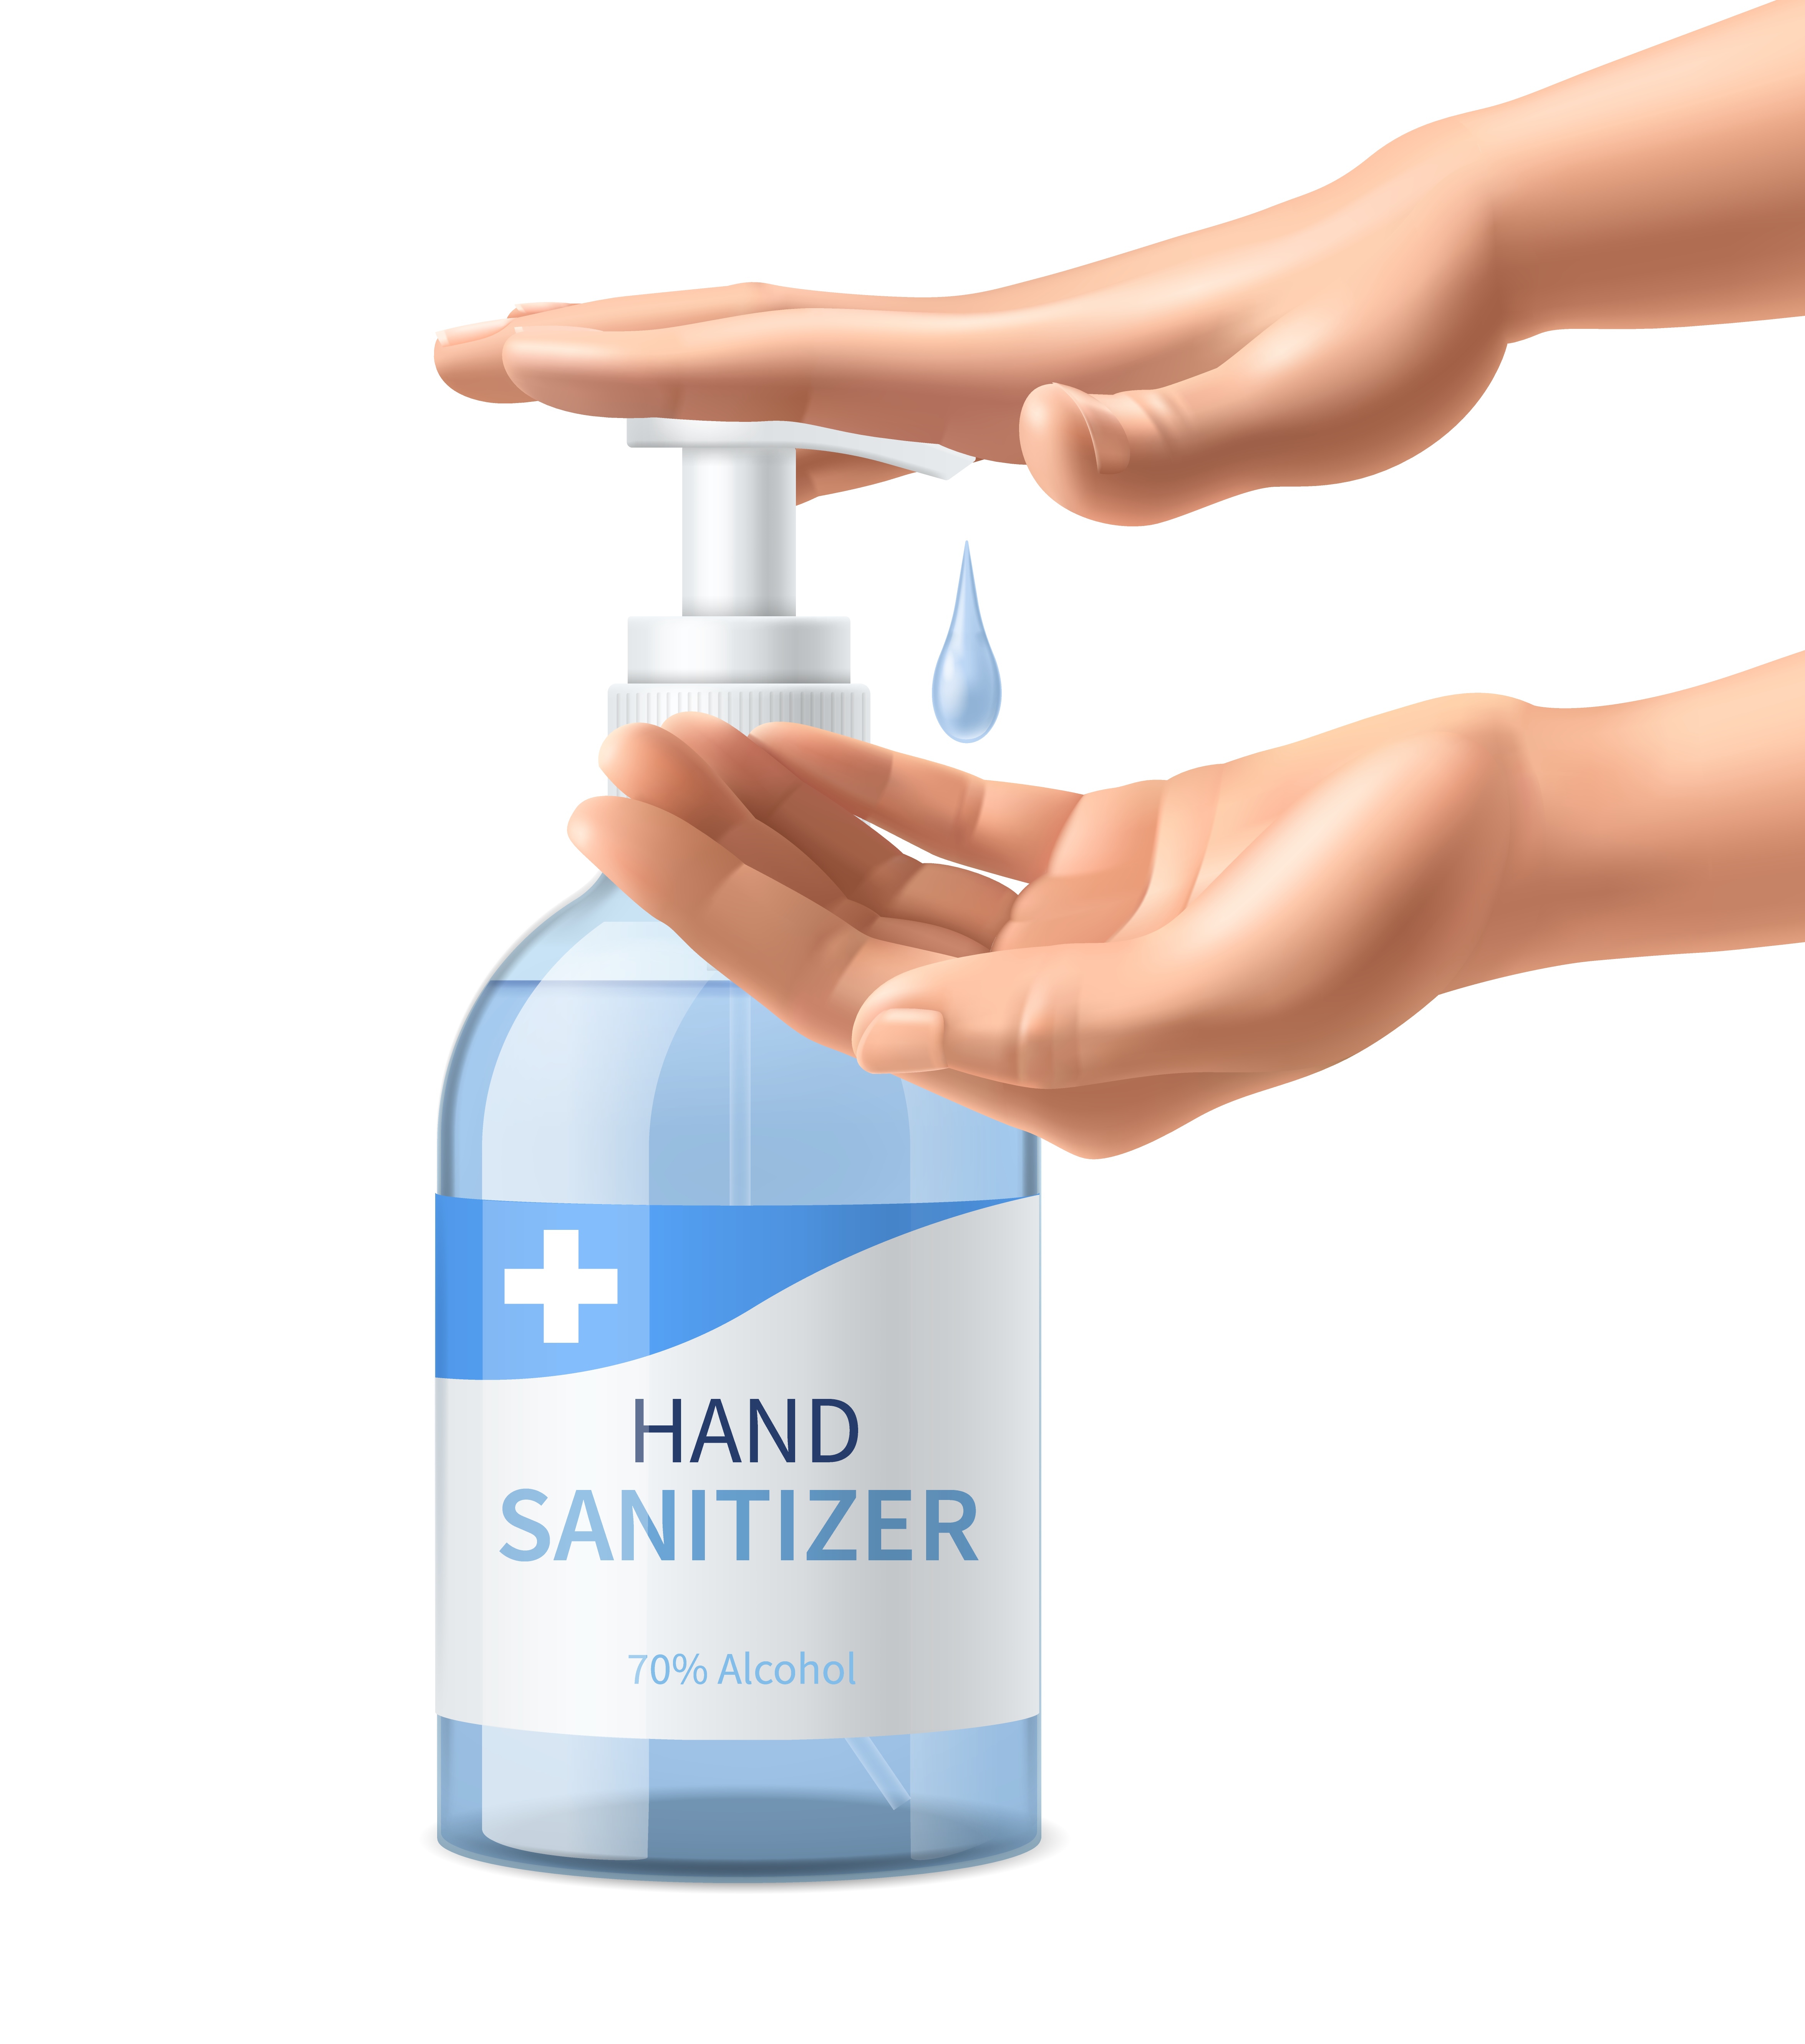 Realistic hands sanitizer bottle. 3d dispenser pump bottle with human hands interaction, transparent disinfectant gel drop in palm. Covid-19 and flu virus protection poster vector promotional banner. Realistic hands sanitizer bottle. 3d dispenser pump bottle with human hands interaction, transparent disinfectant gel drop in palm. Flu virus protection poster vector promotional banner